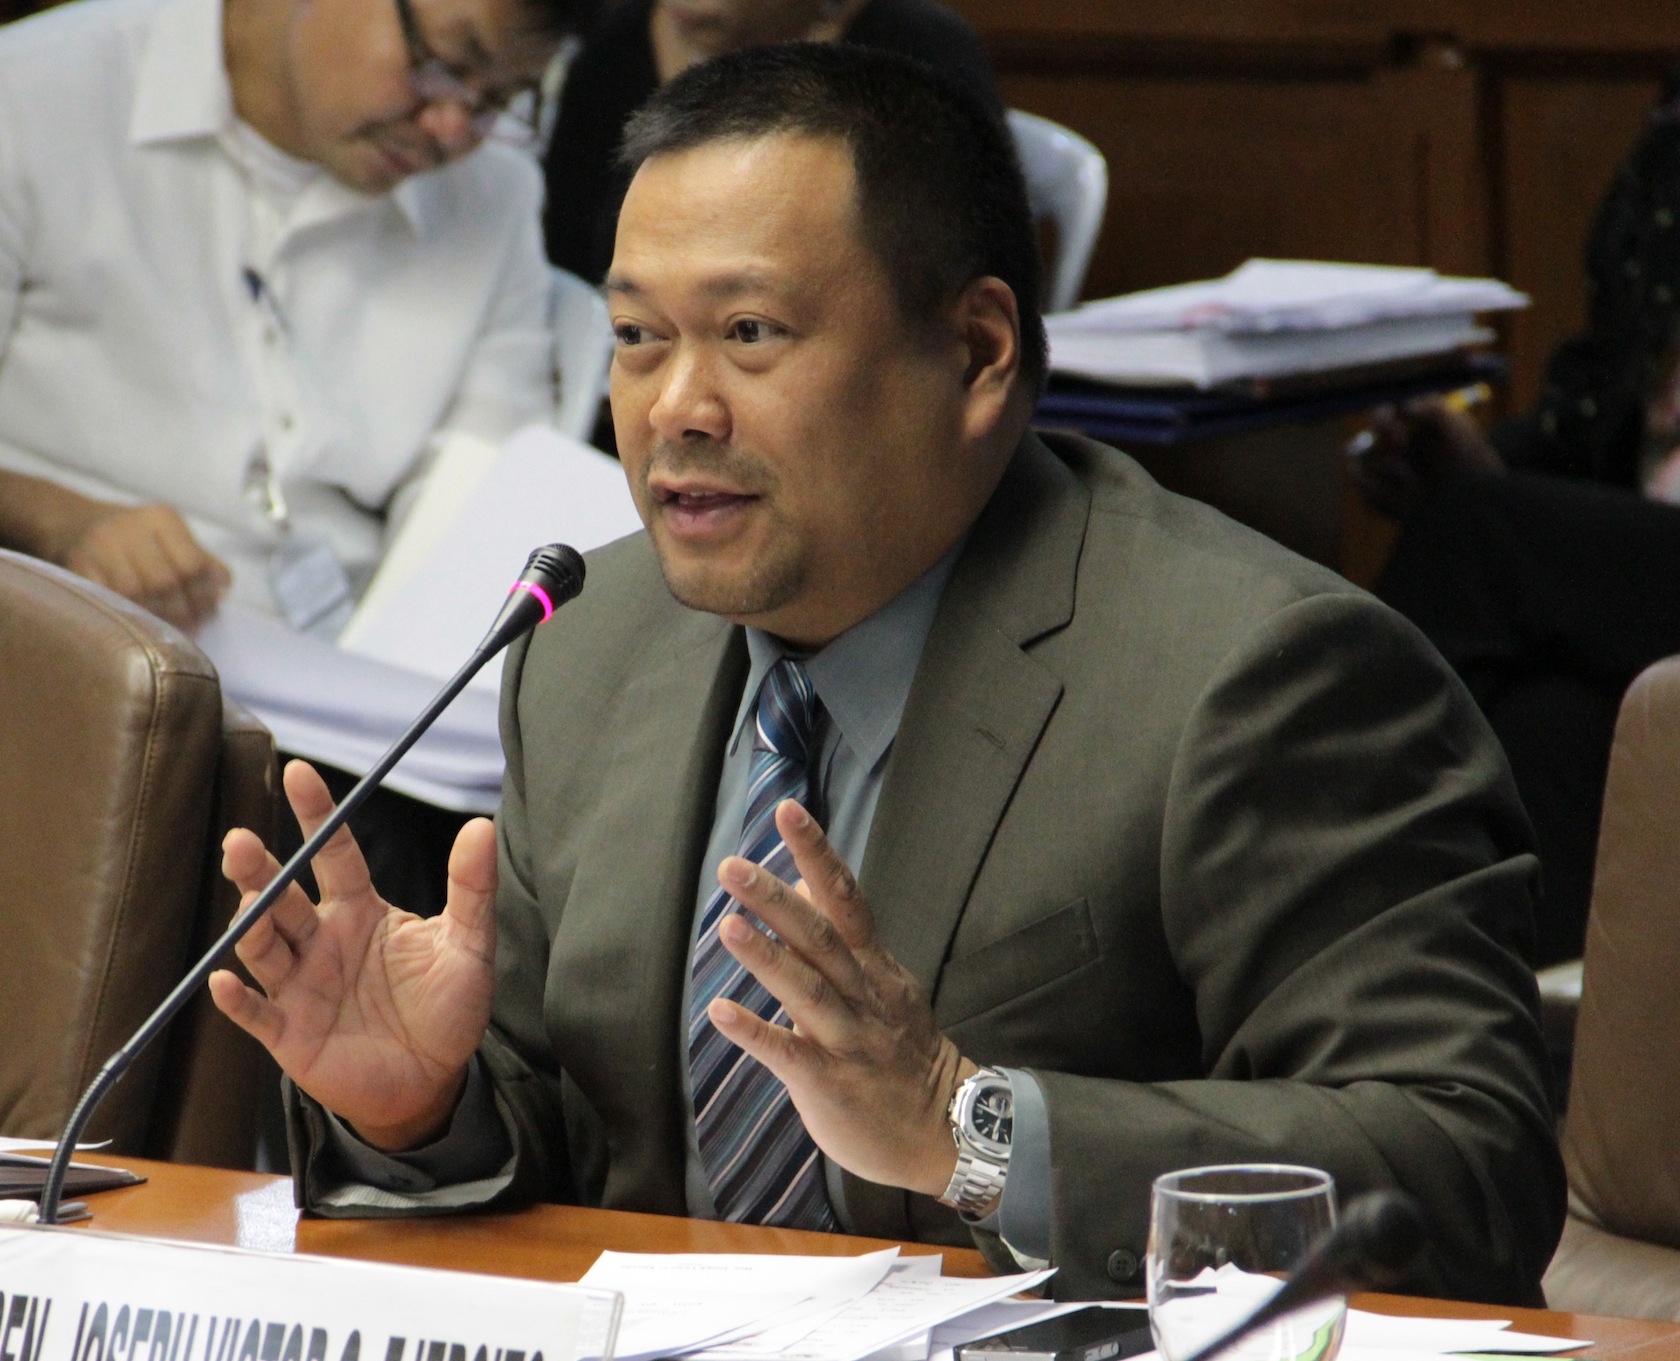 JV ASKS PNOY: APPOINT EXPERTS NOT ALLIES